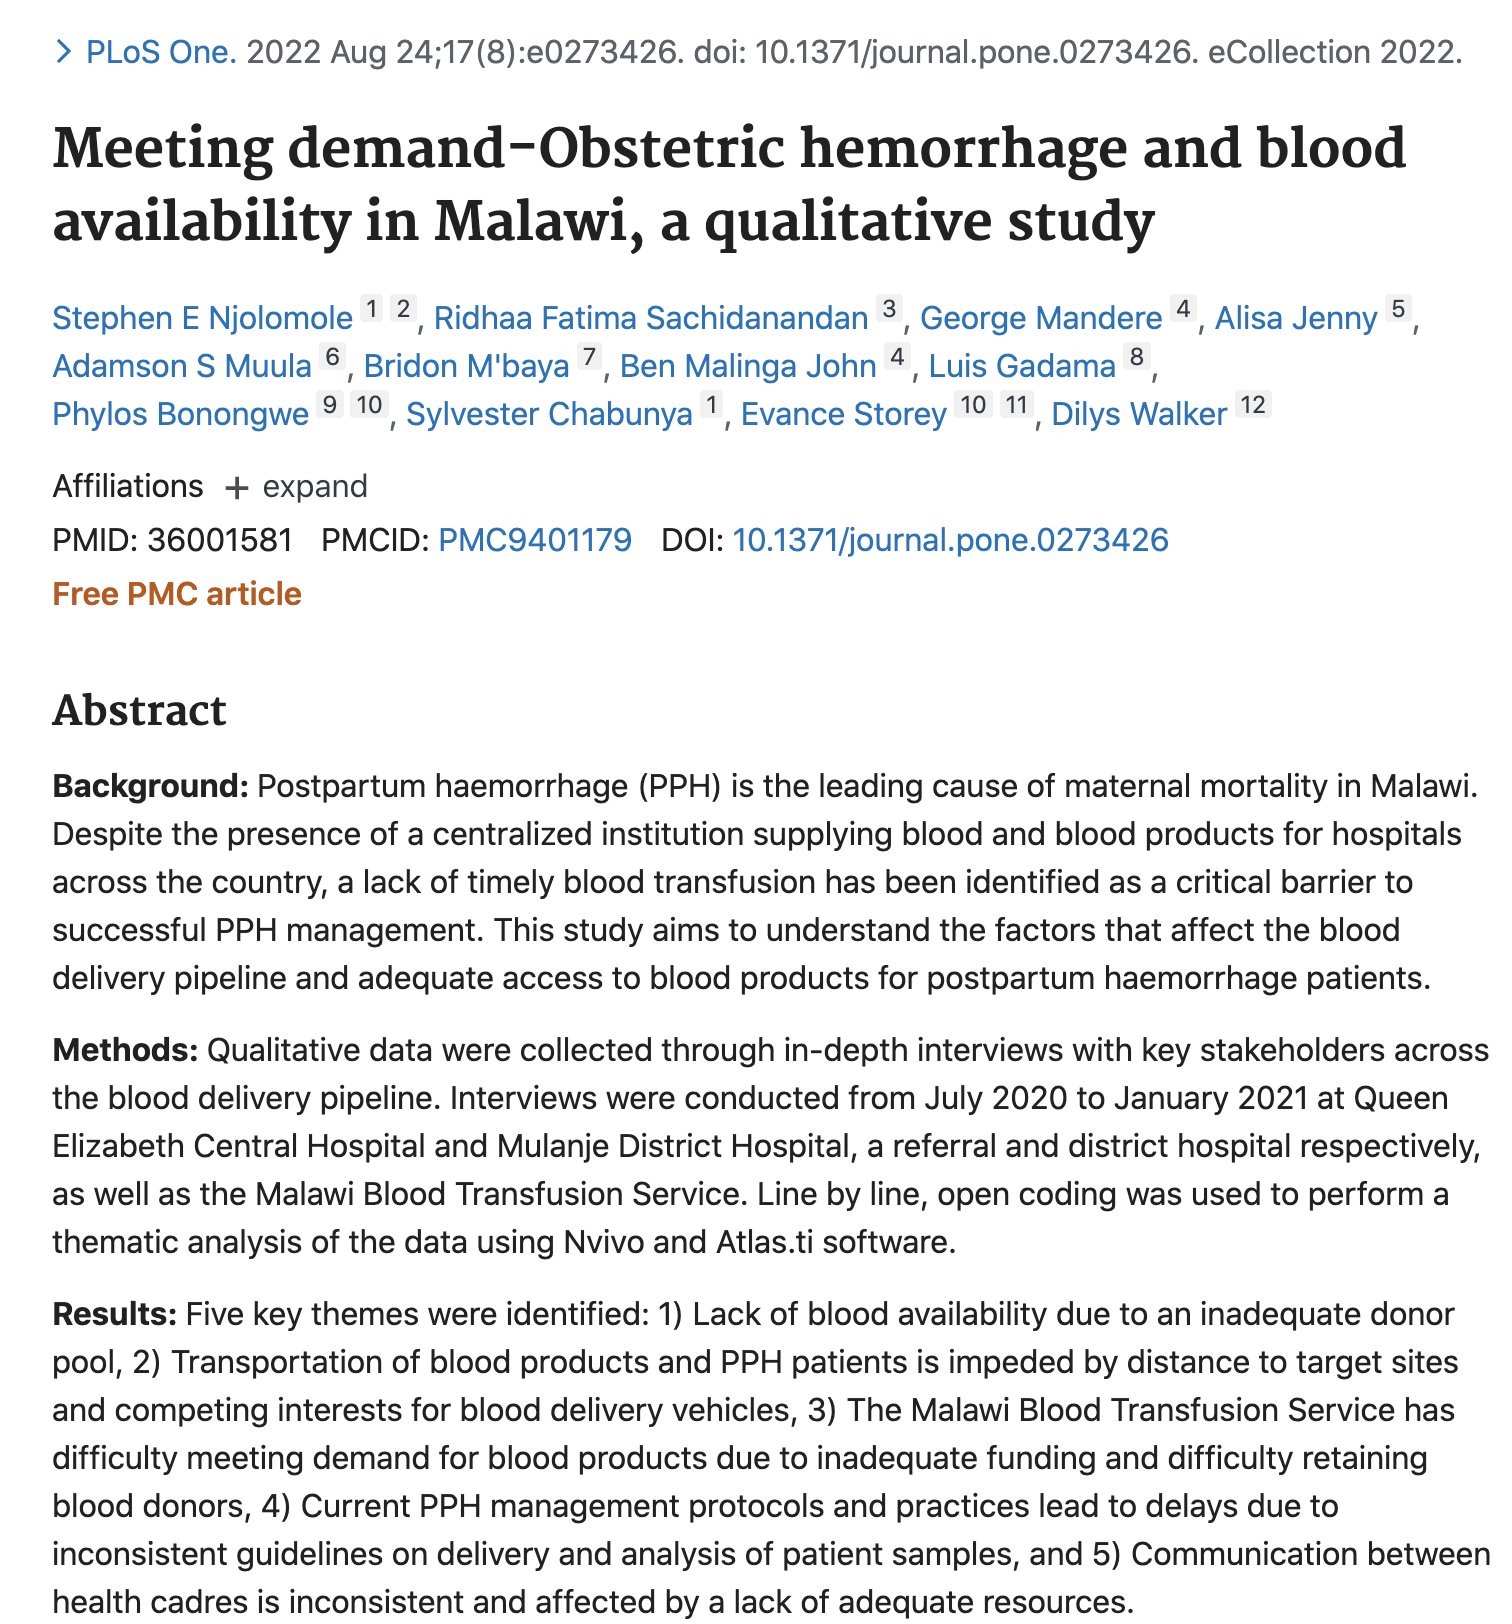 Meeting demand-Obstetric hemorrhage and blood availability in Malawi, a qualitative study